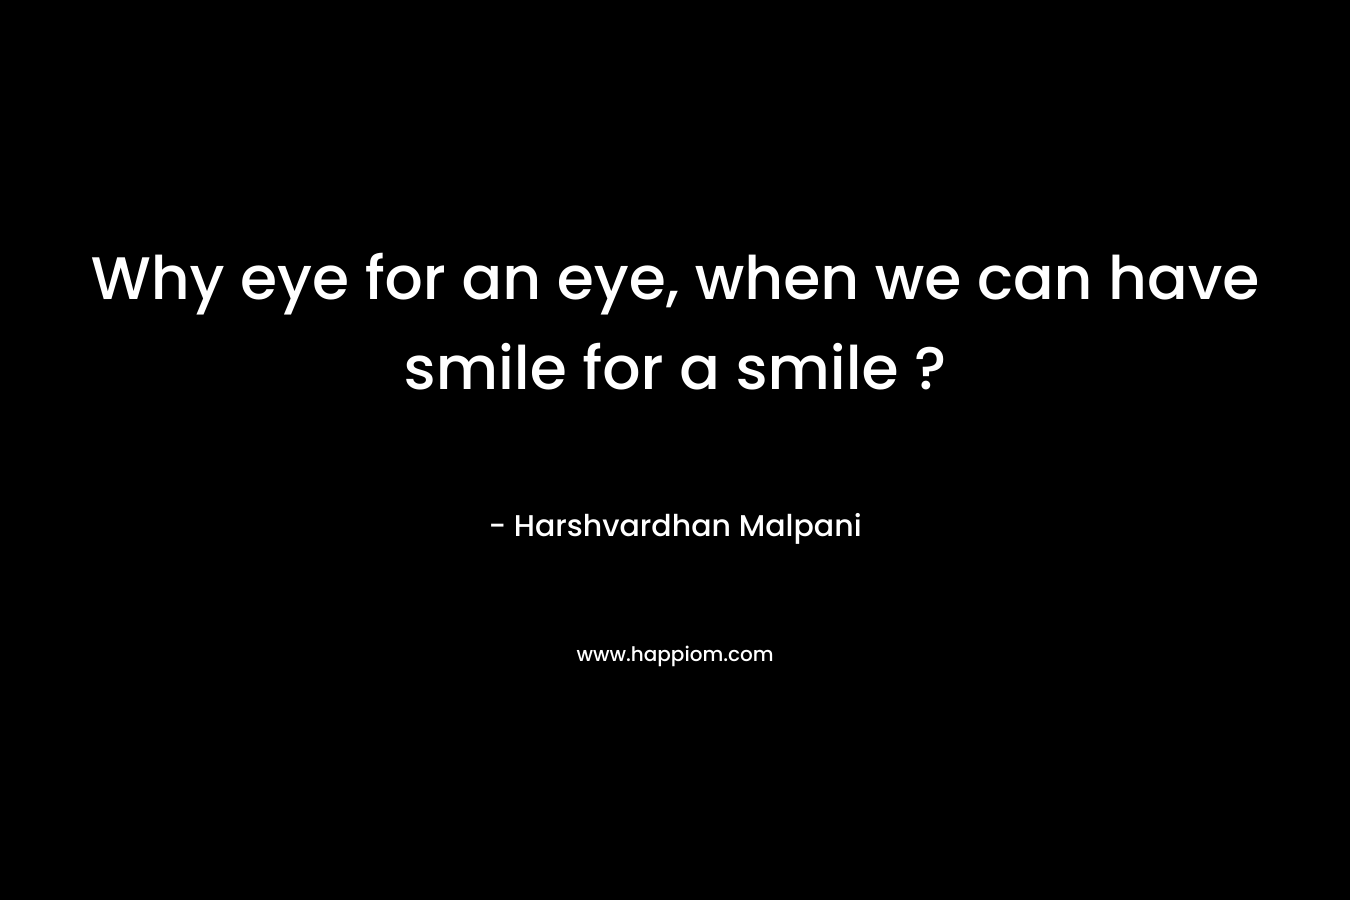 Why eye for an eye, when we can have smile for a smile ?